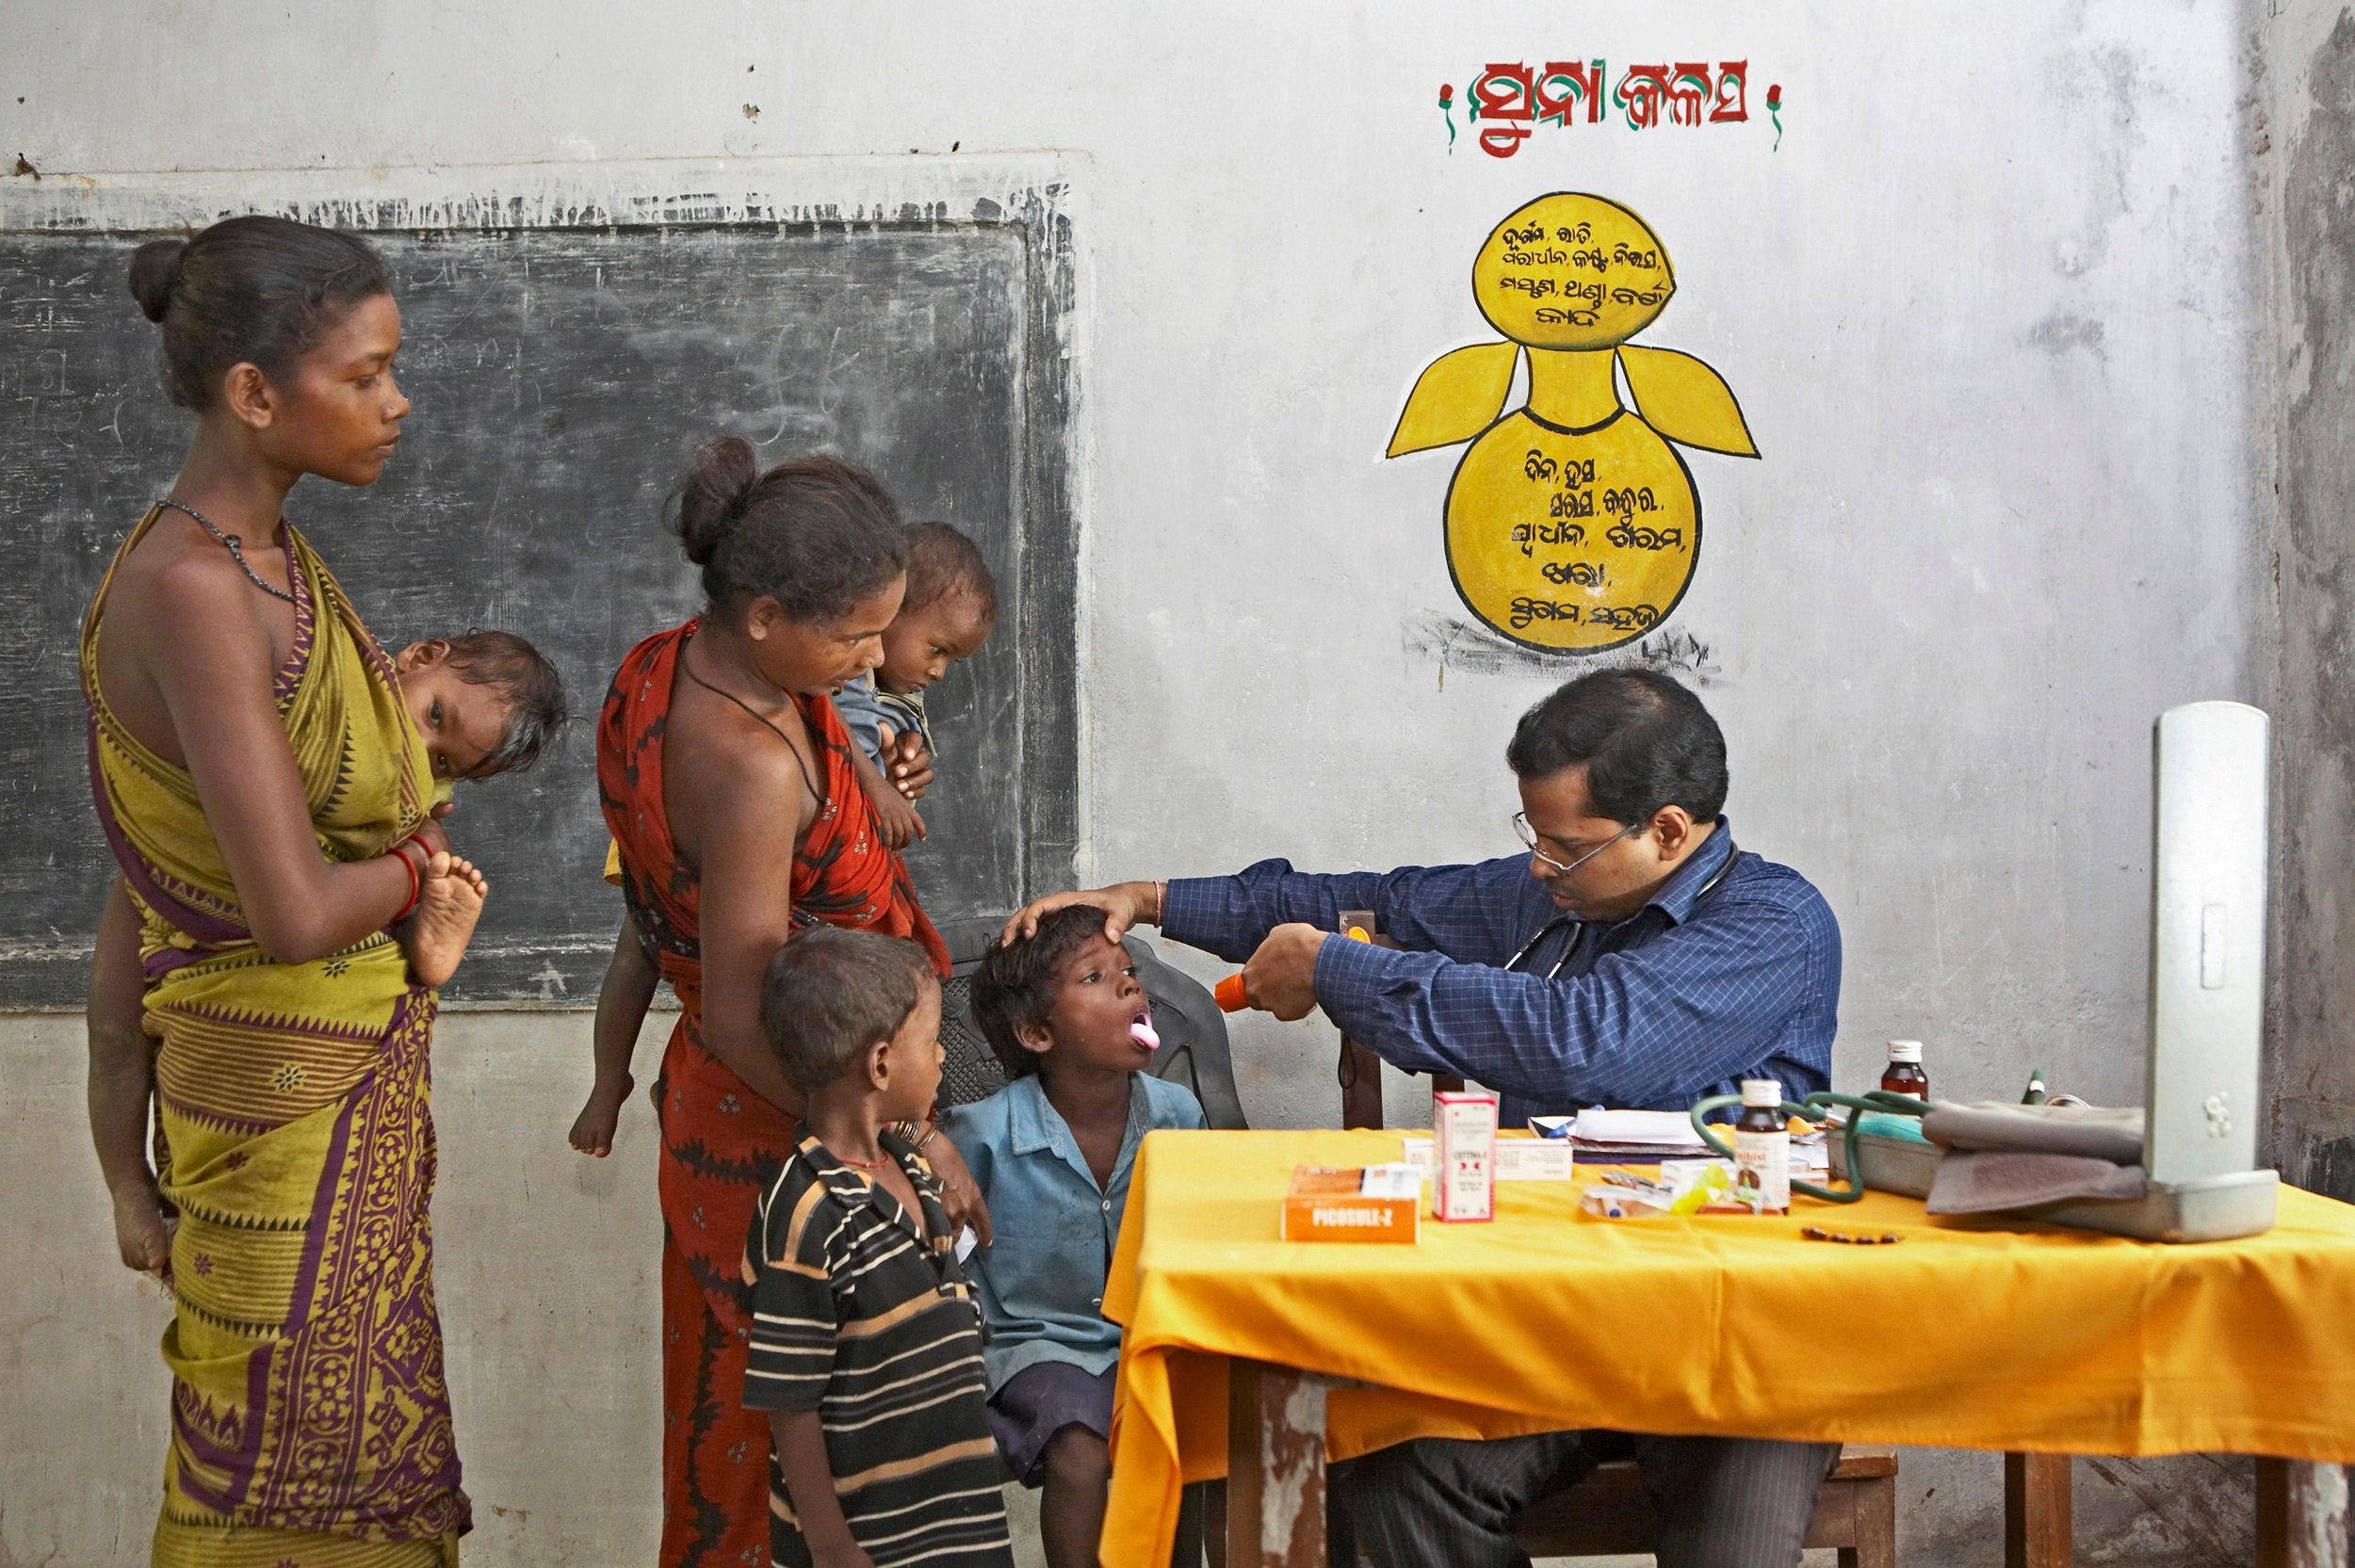 <p>Medical doctor examining health of poor villagers at health check up camp initiative started by NGO Chinmaya Organization India (Image: Alamy)</p>